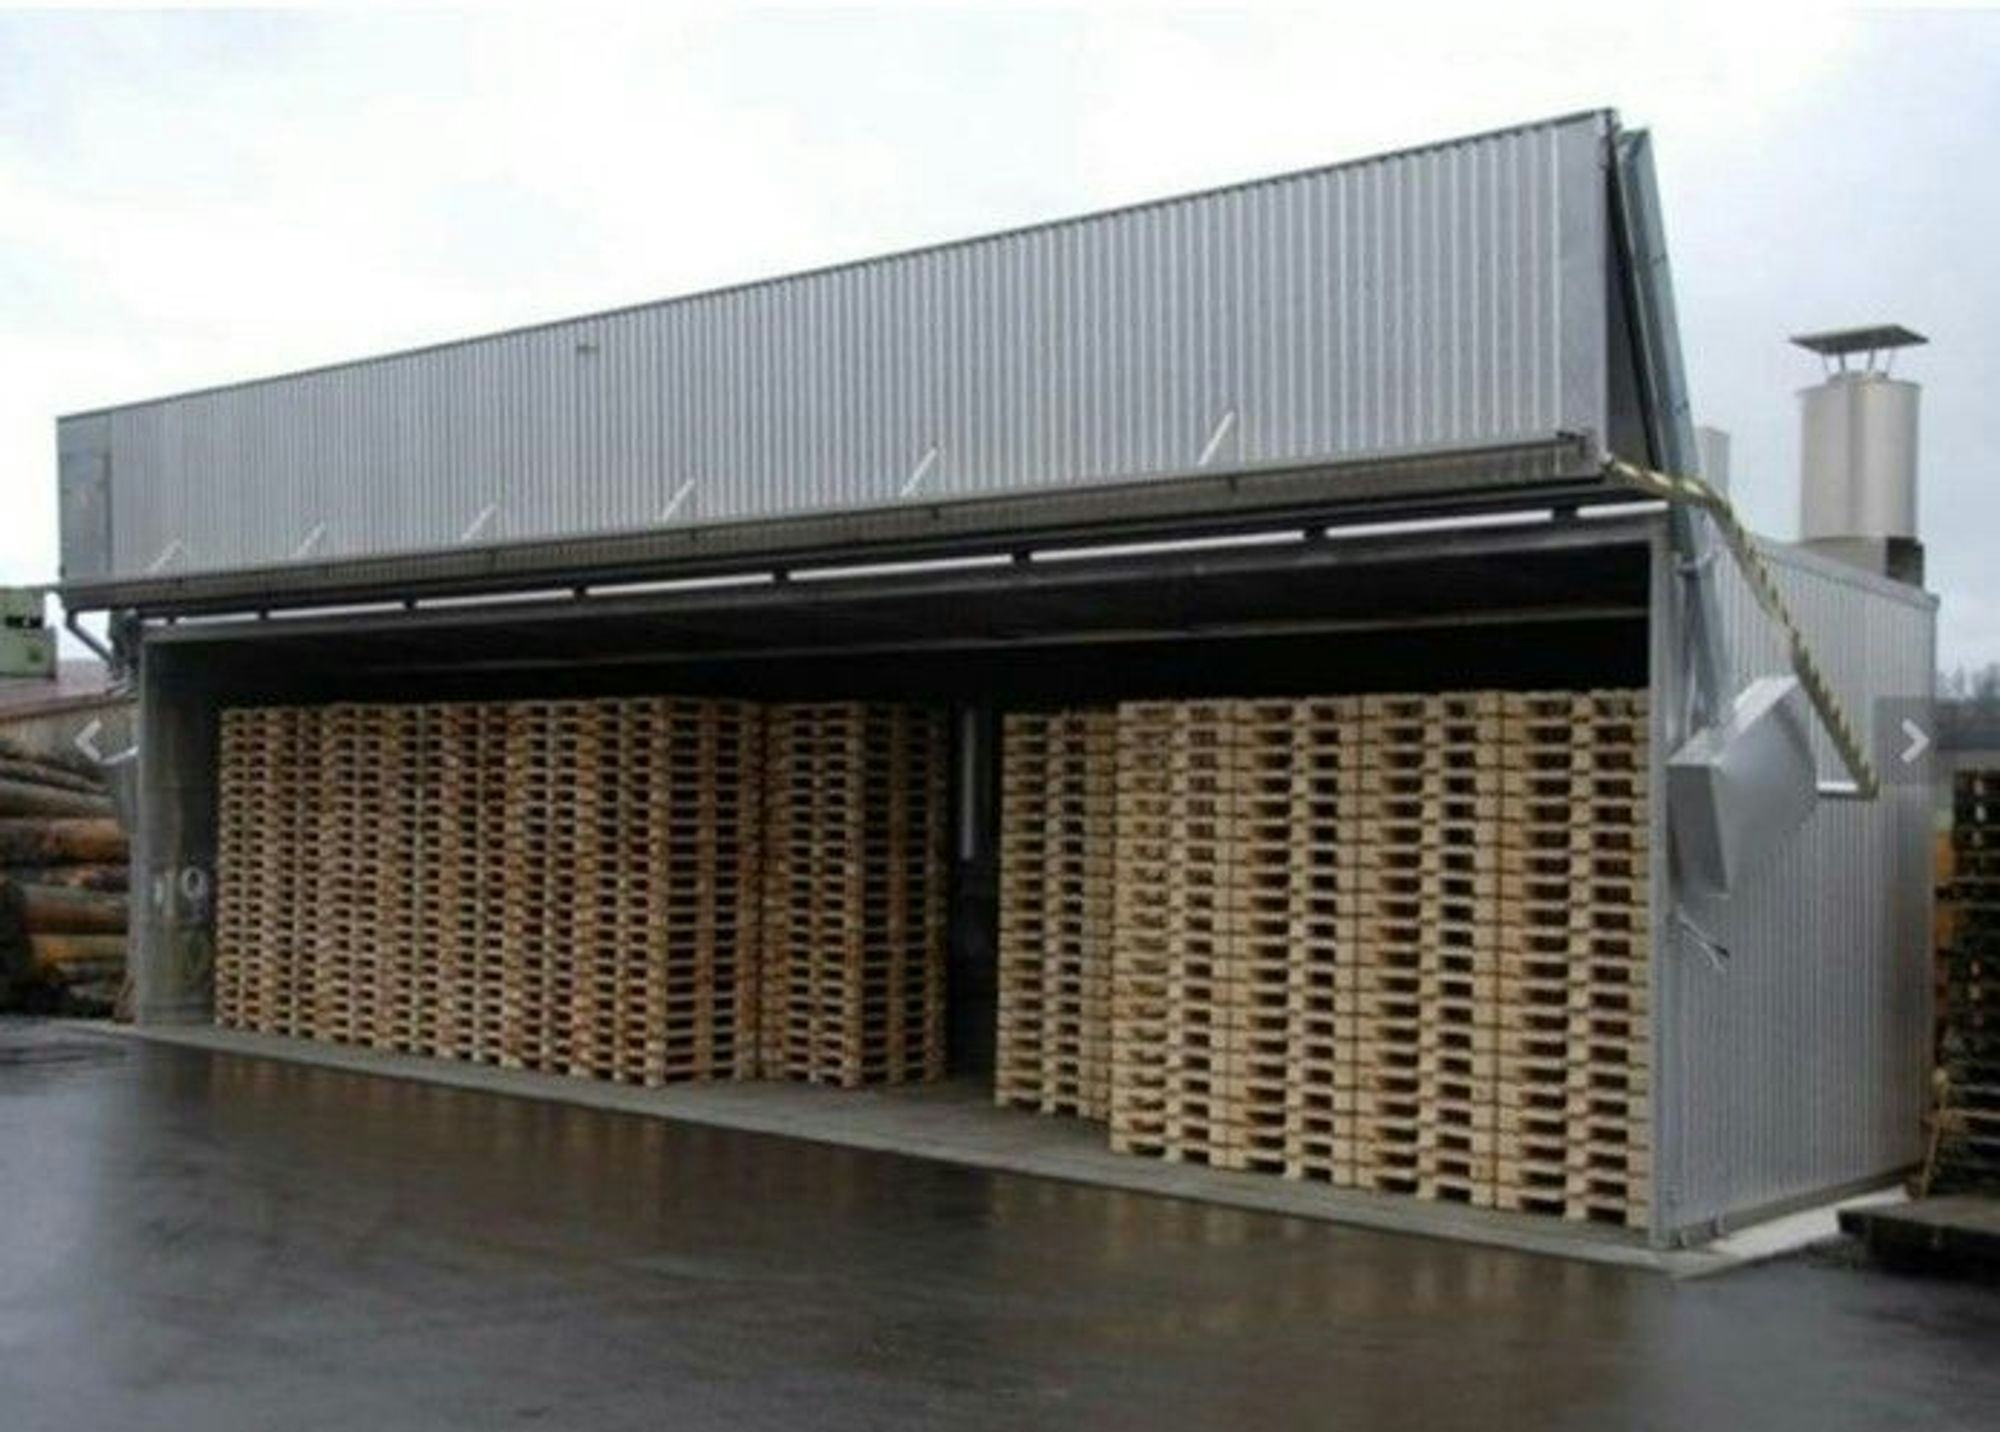 large industrial container filled with multiple layers of wooden pallet